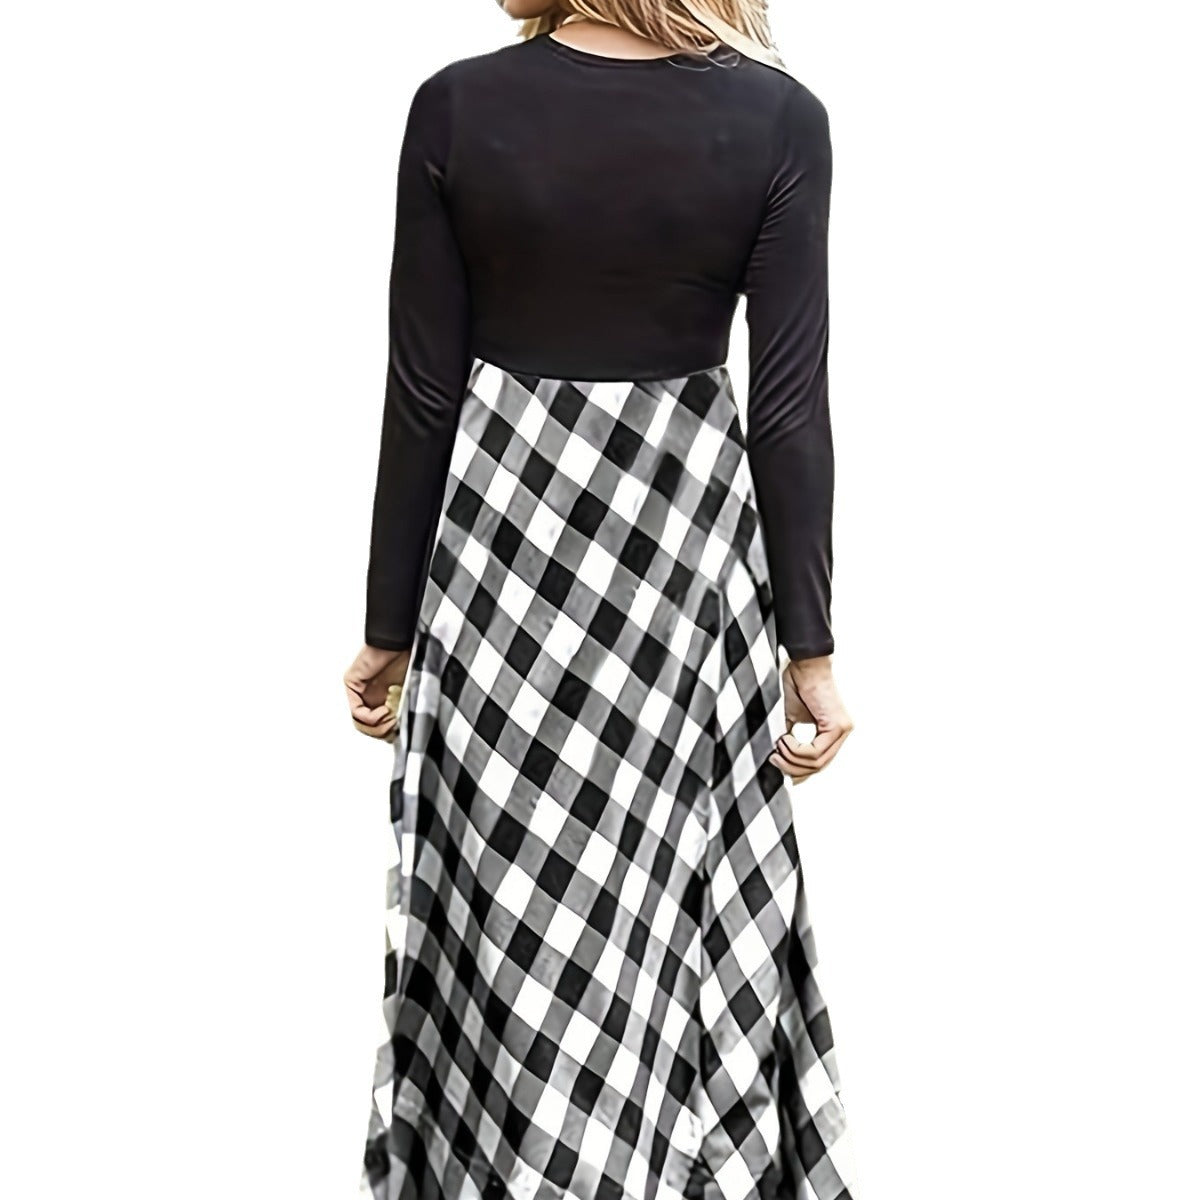 Women's Neck Stitching Contrast Color Check Dress Fashion Casual Dresses